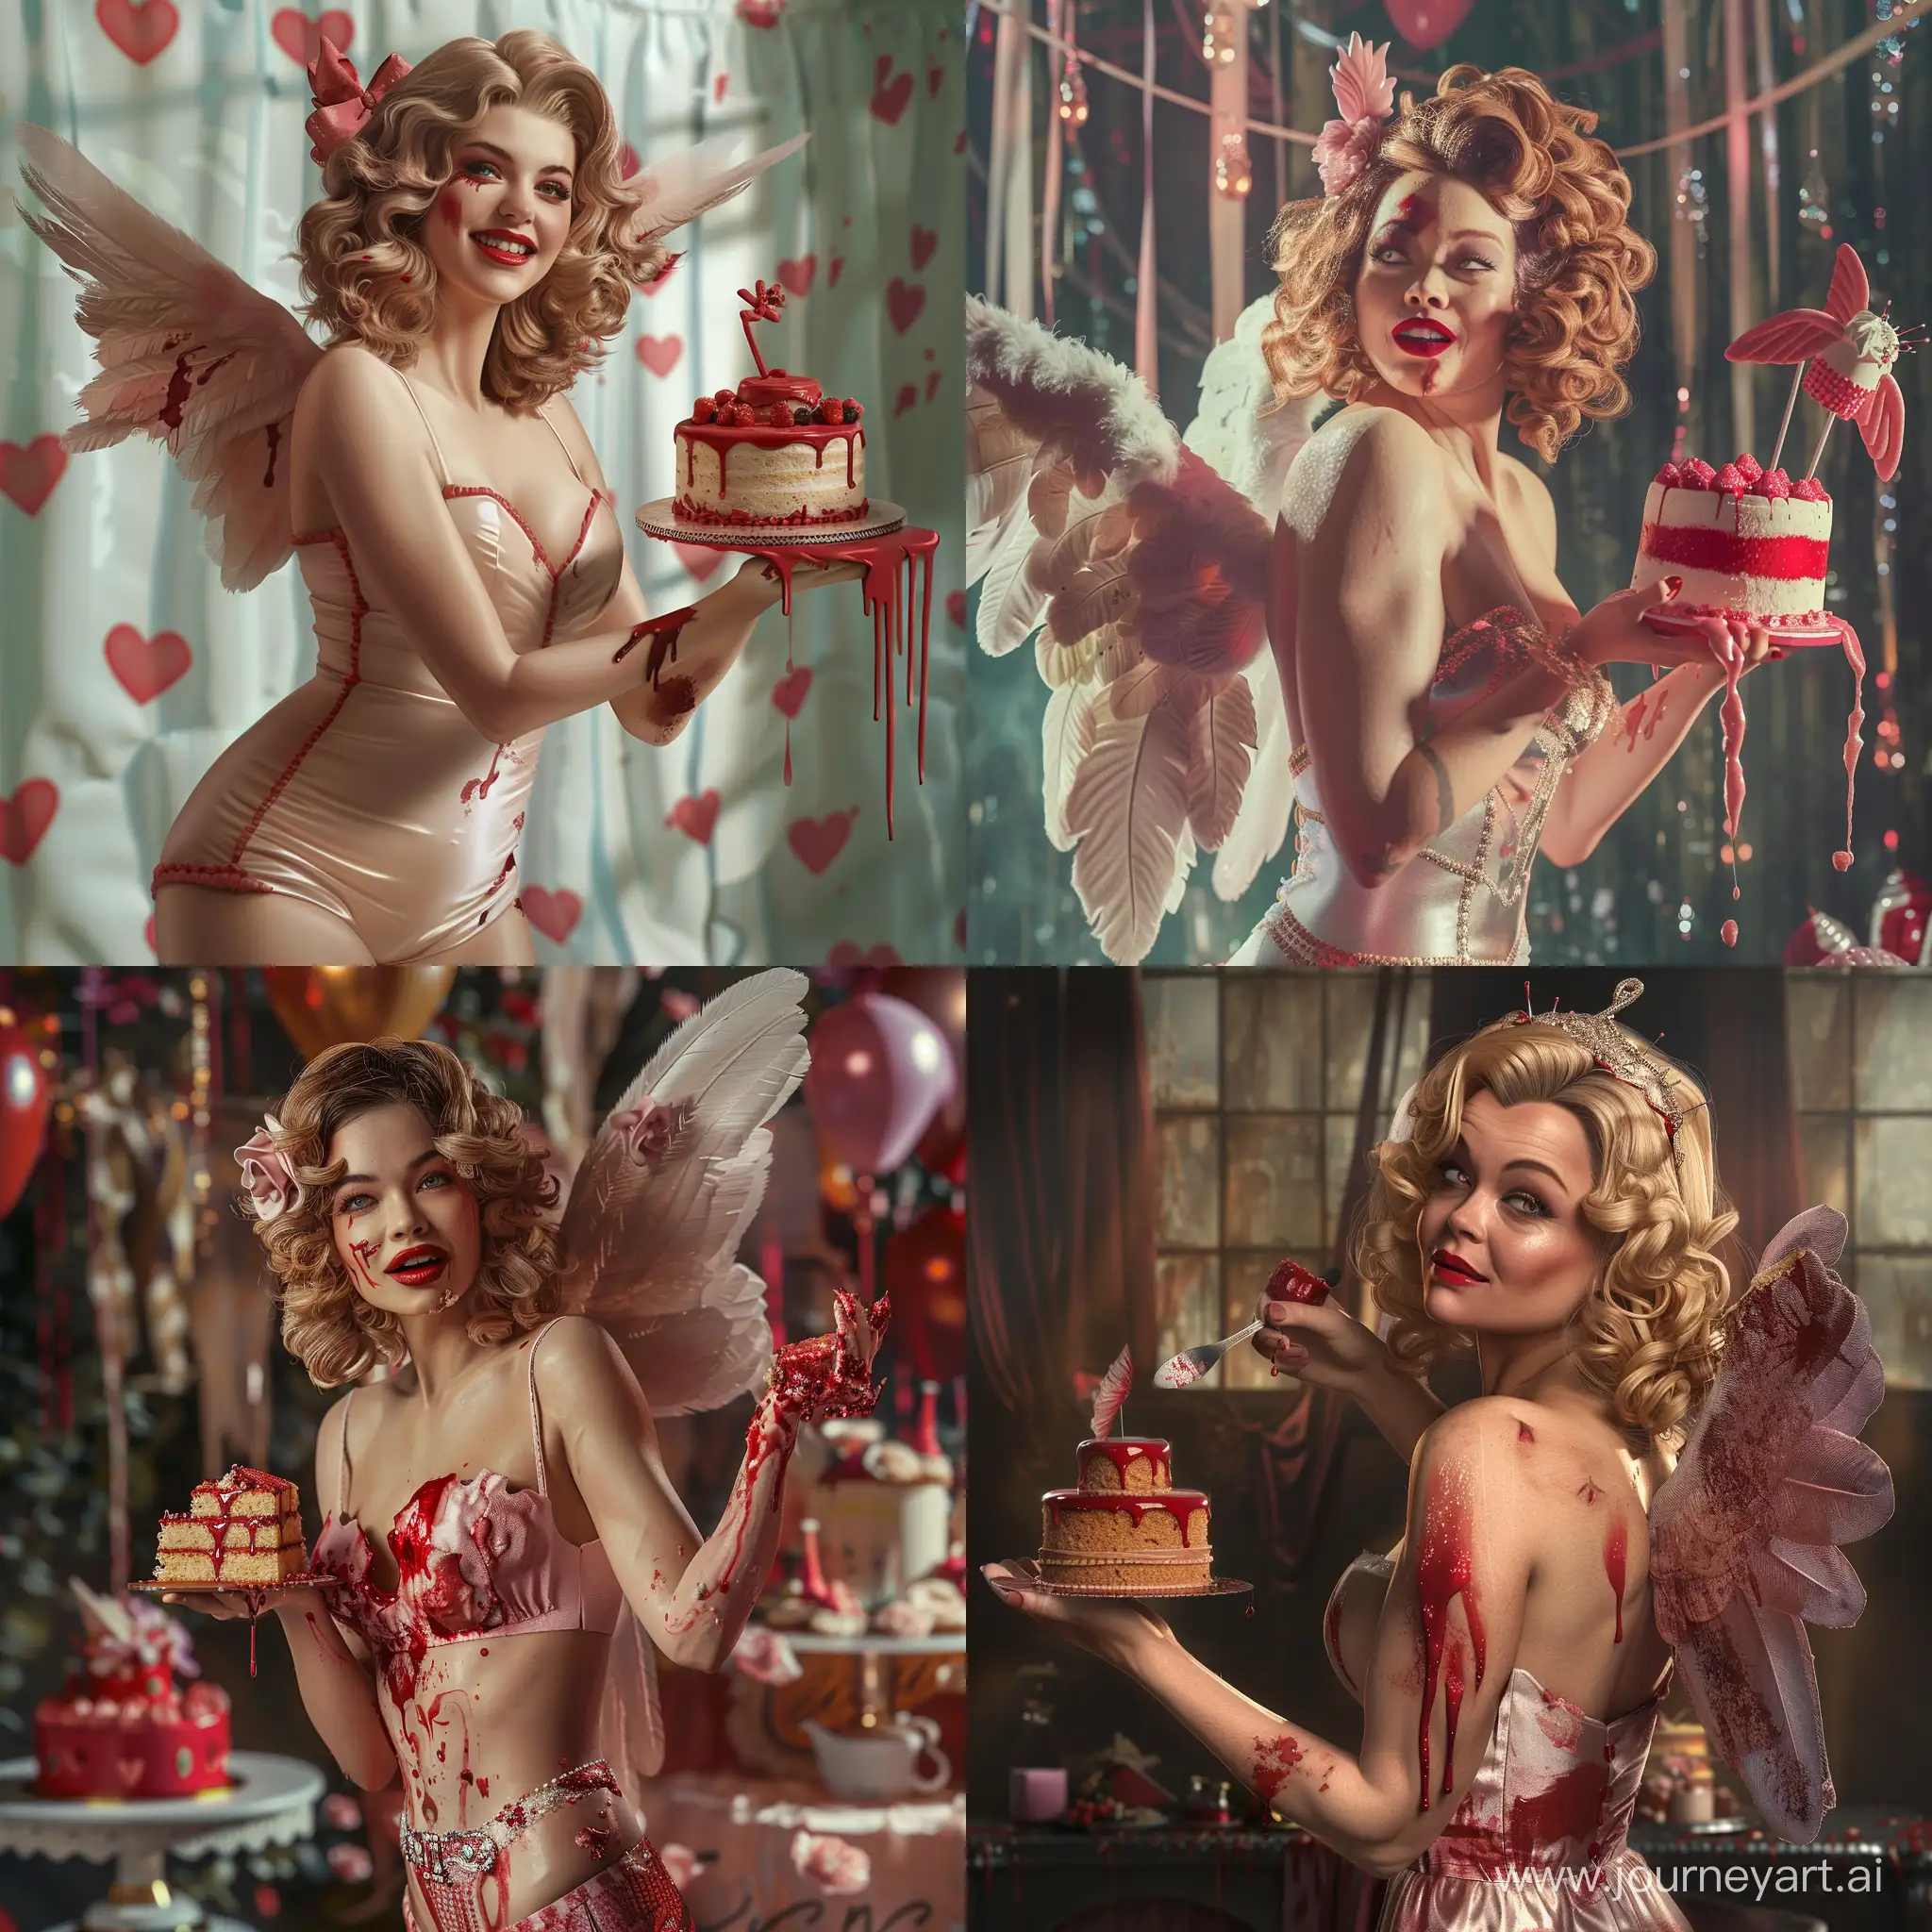 A 50s woman with a cake in her hand, revenge smile, angel, blood, horror, party background, cupid costume, detailed, realistic, photorealistic, real, 50s effect, looking from the front, red and pink cake